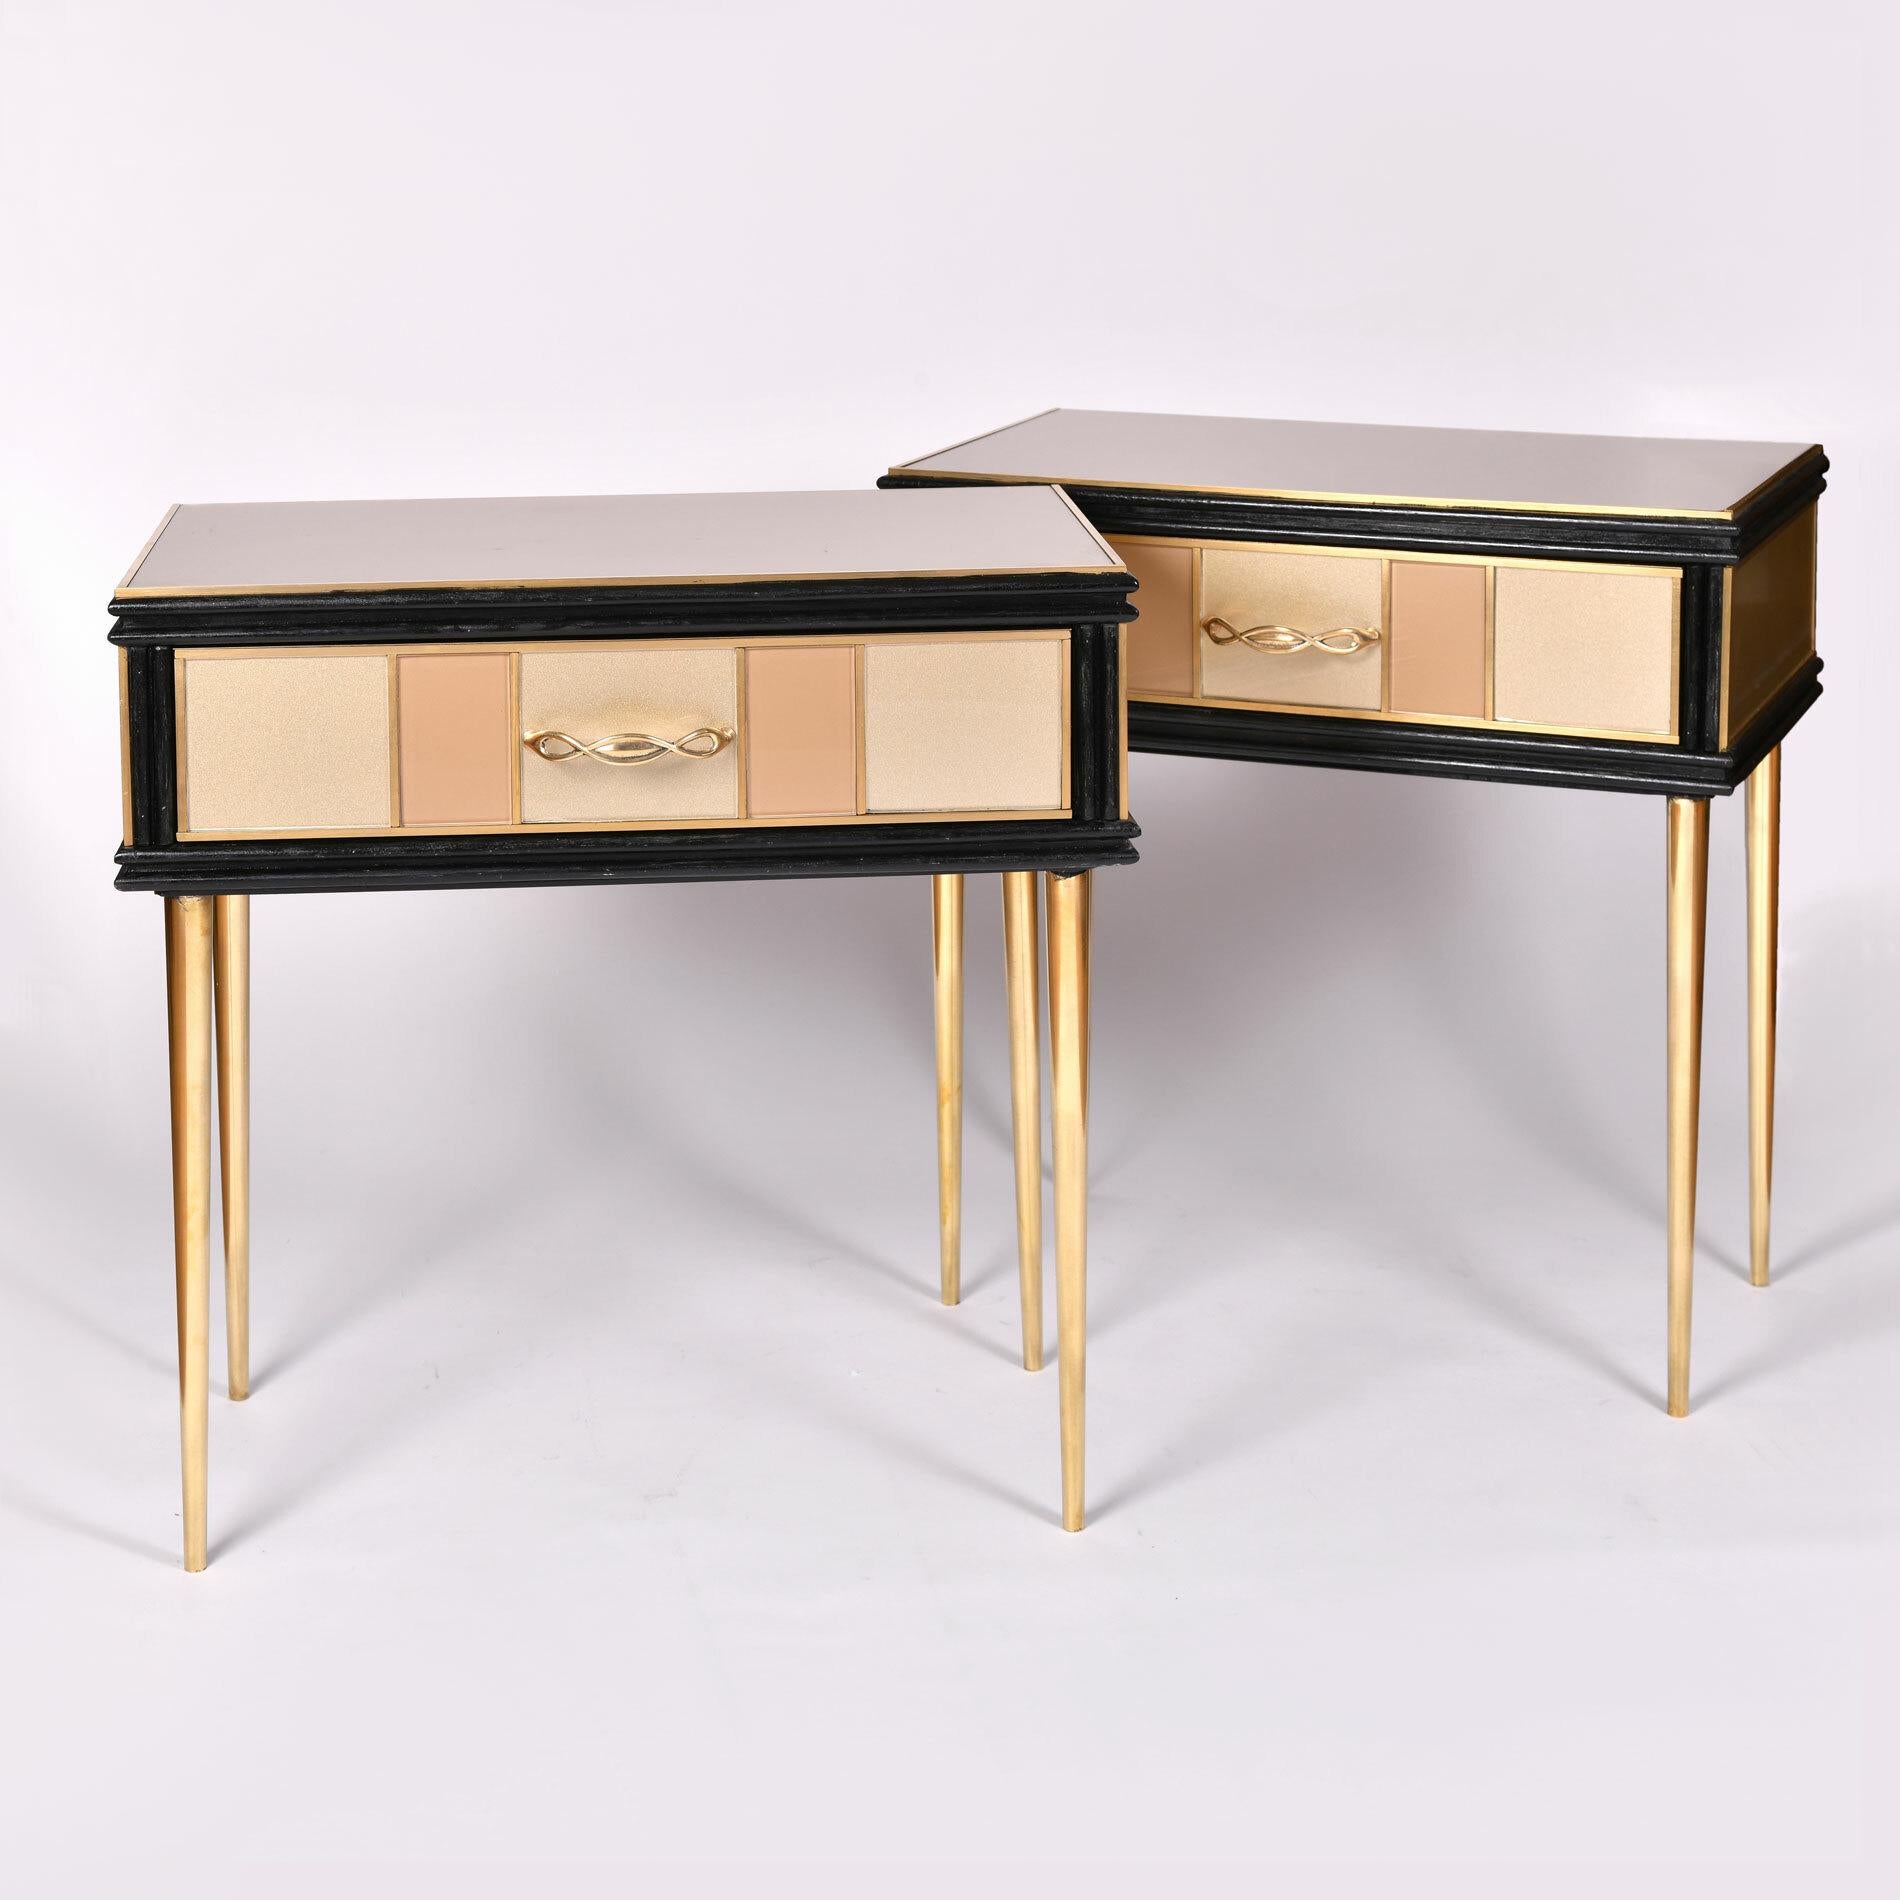 Elegant side tables, each with a single drawer, paneled in alternating gold and cream glass with brass trim and brass twisted handles. 

Tapered brass legs.

Measures: 60 cm high x 57 cm wide x 31 cm deep (34cm including handle).